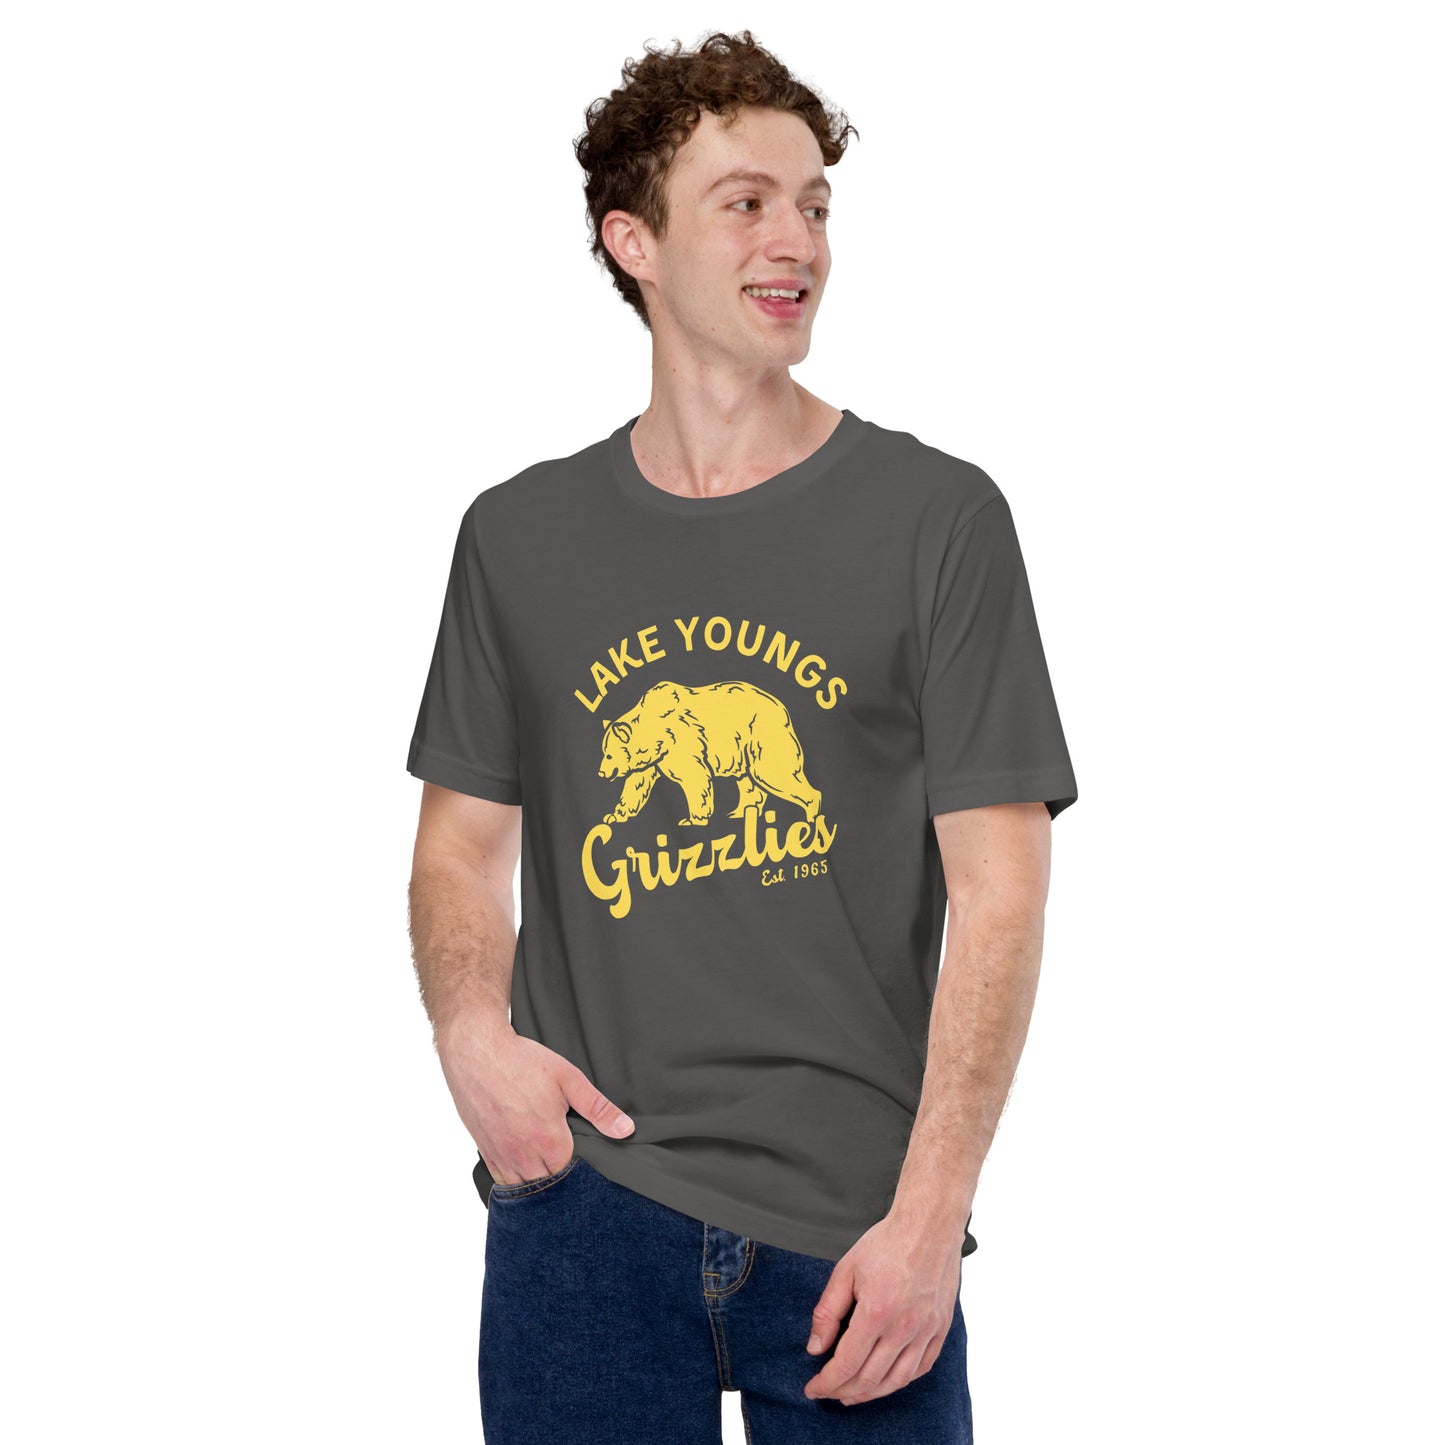 Yellow “Retro Lake Youngs” Adult Short Sleeve T-Shirt